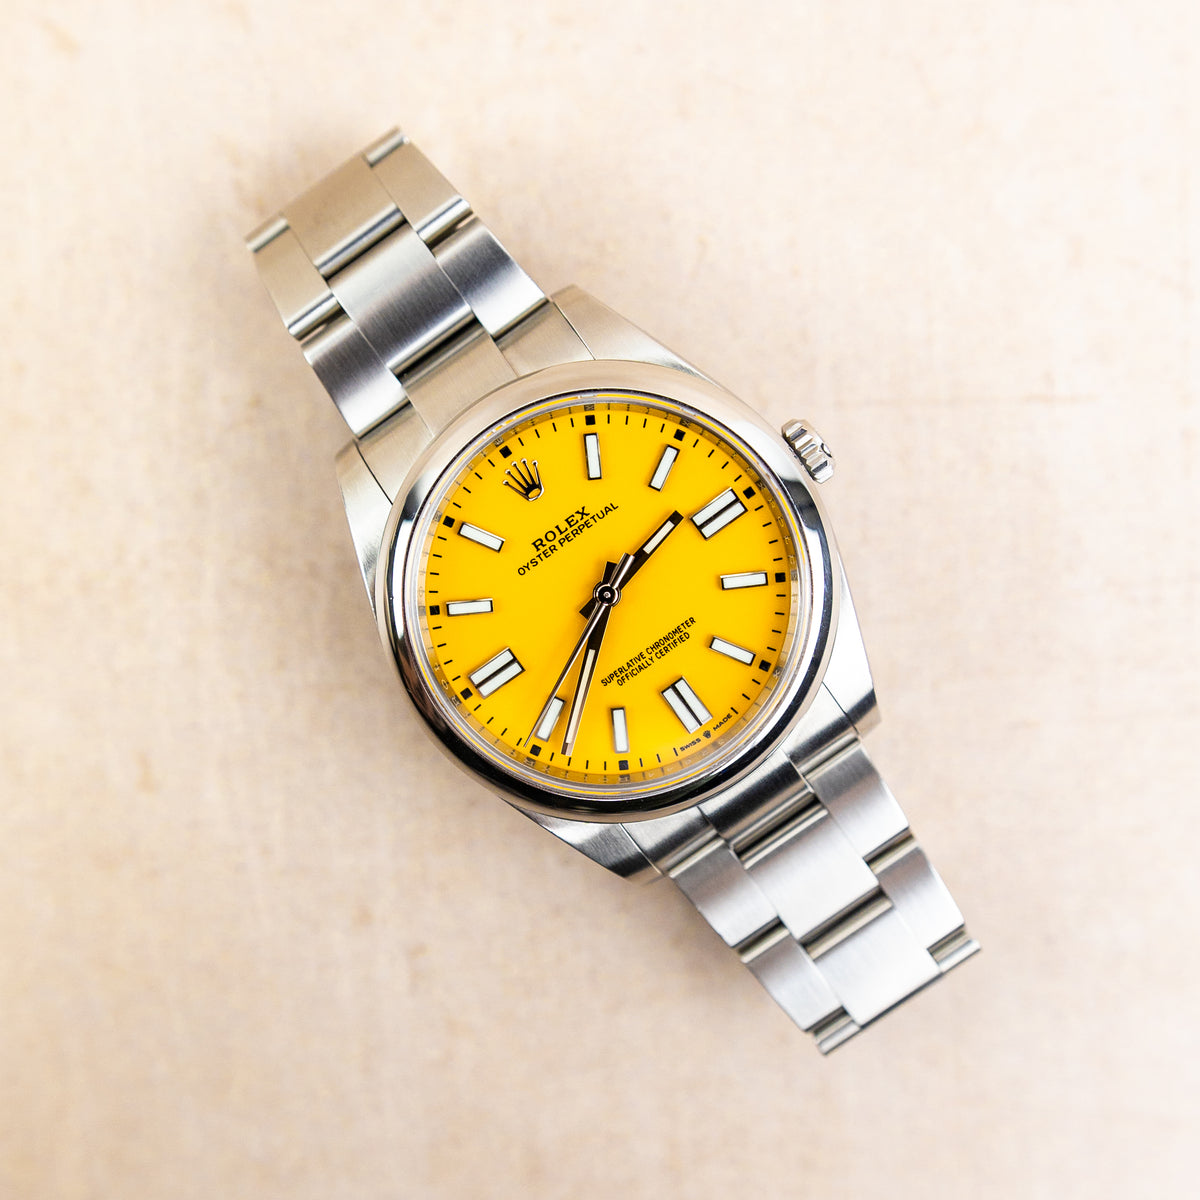 Unworn Pre - Owned 2021 Rolex OYSTER PERPETUAL 41mm Oystersteel Yellow Dial 124300 at RR Jewellers Yarm